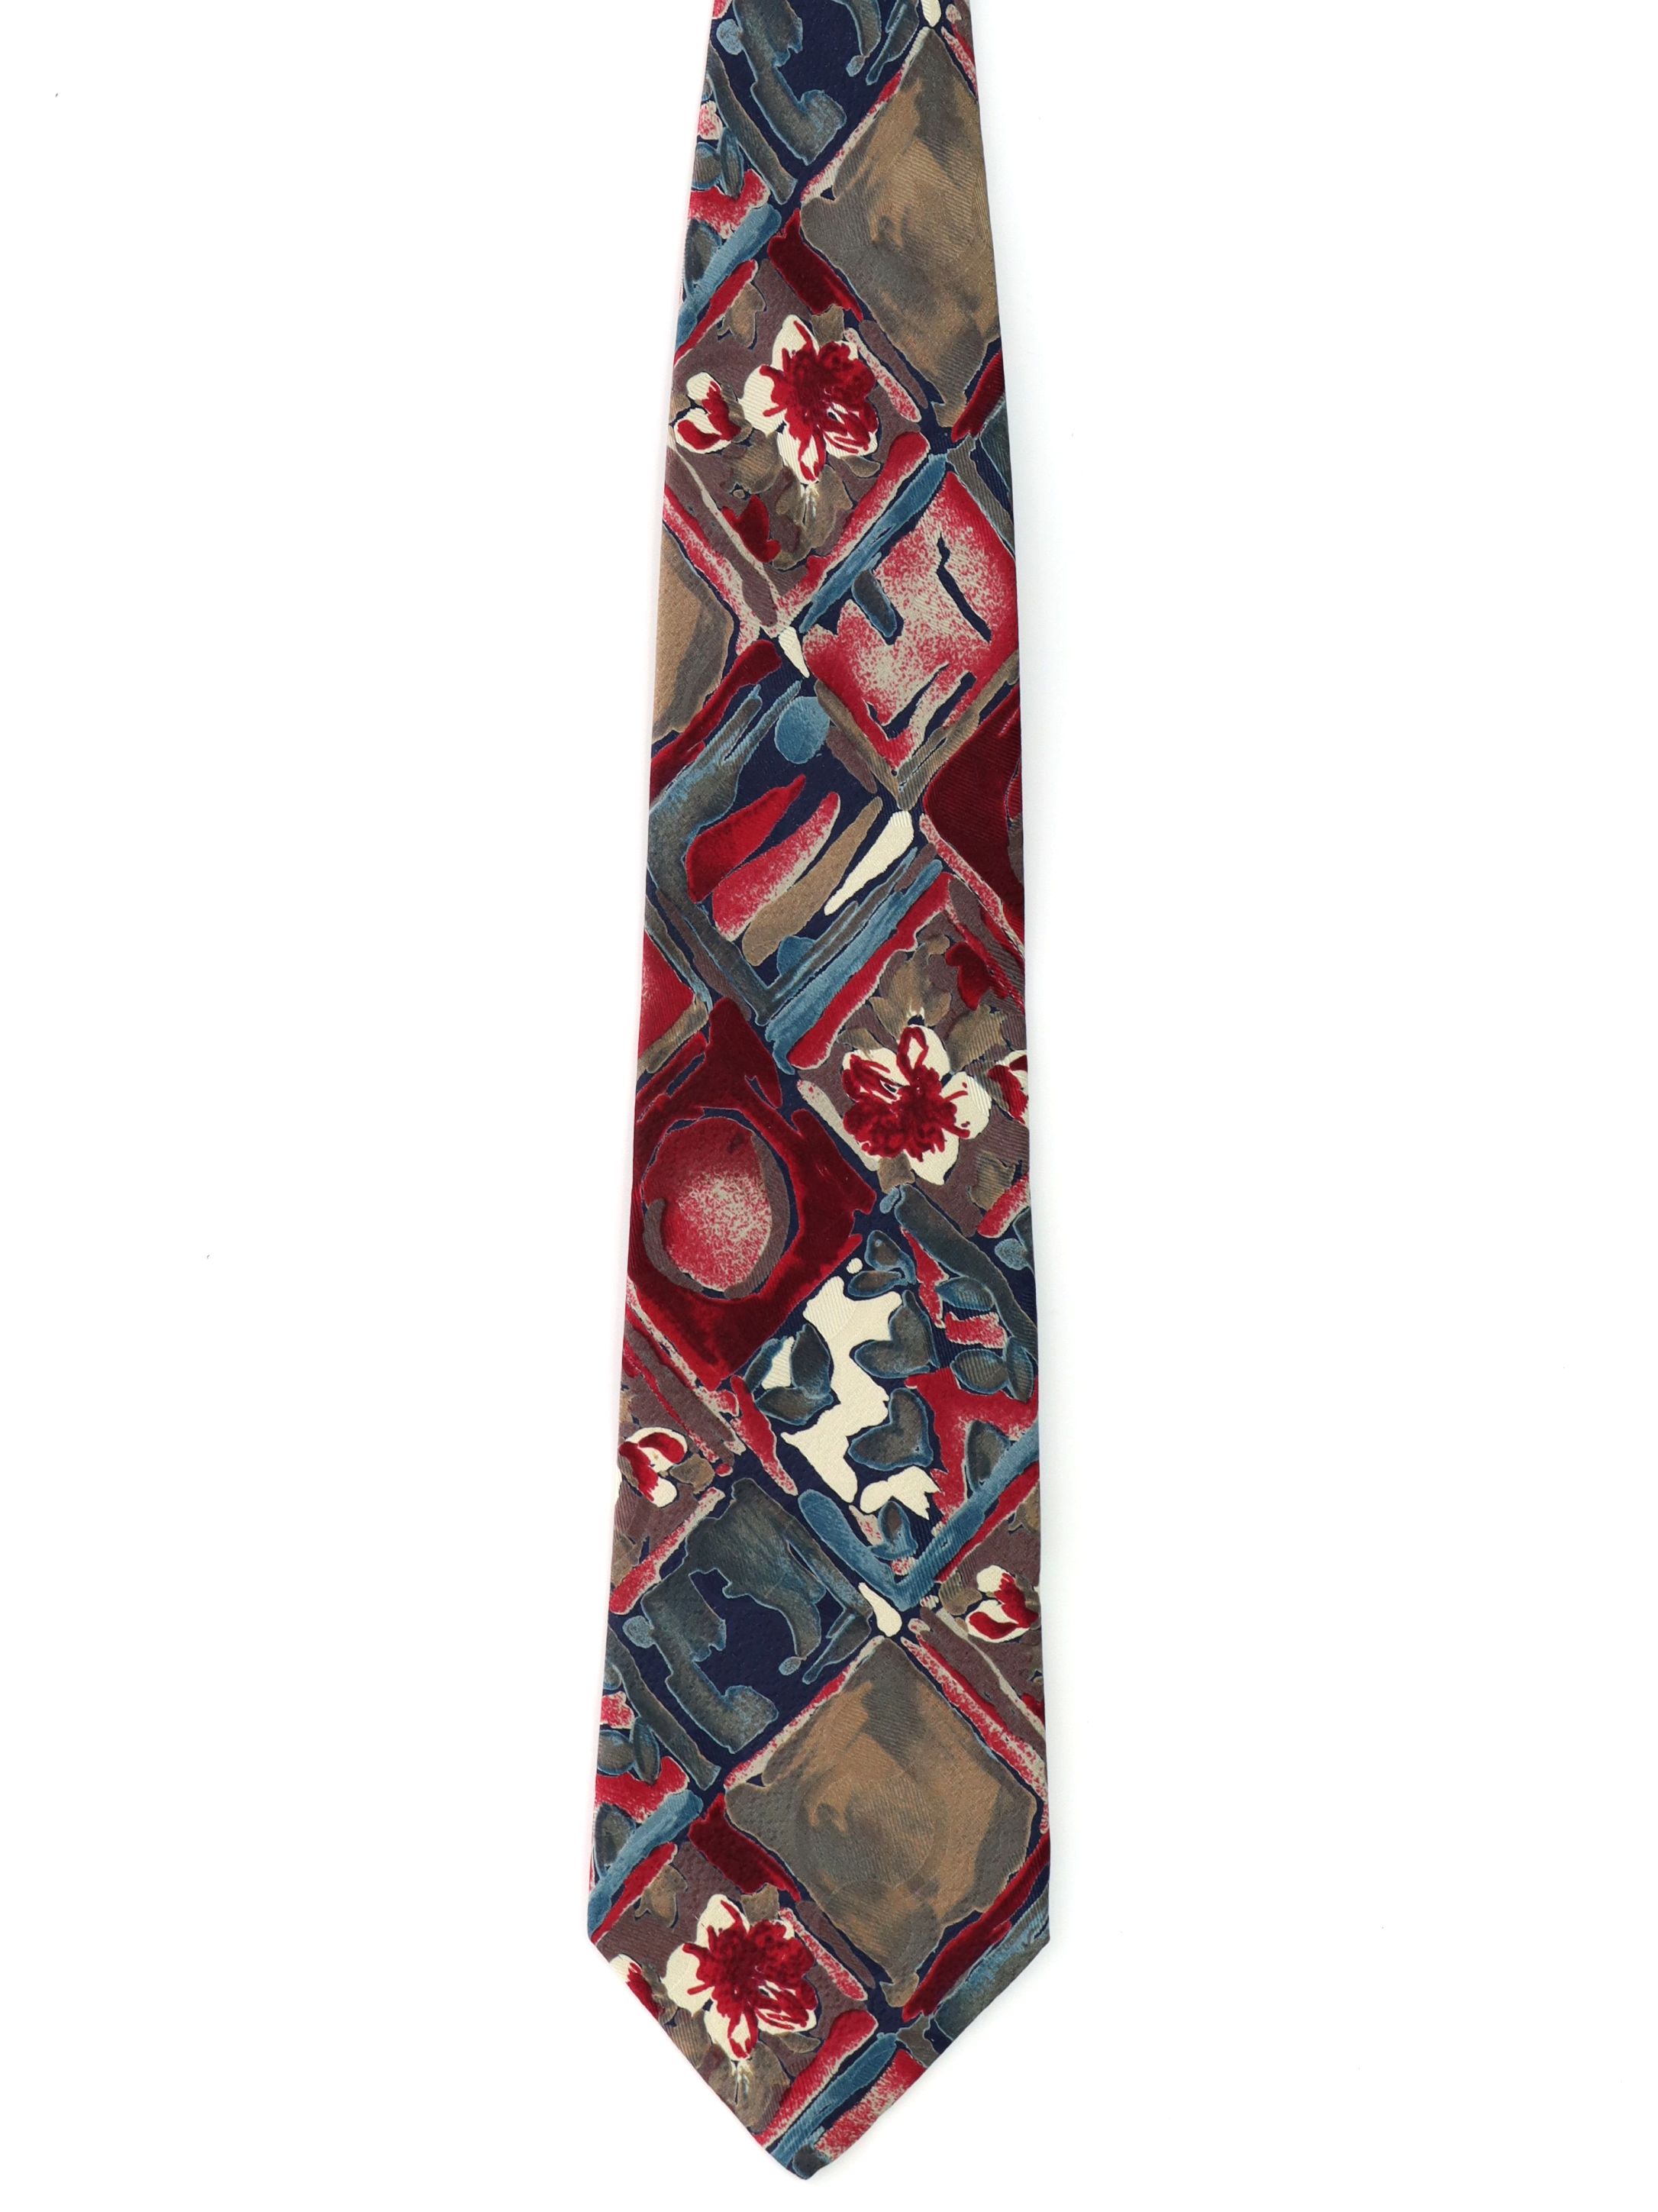 90's Neck Tie: 90s -Gherardini, Firenze (Florence) Made in Italy